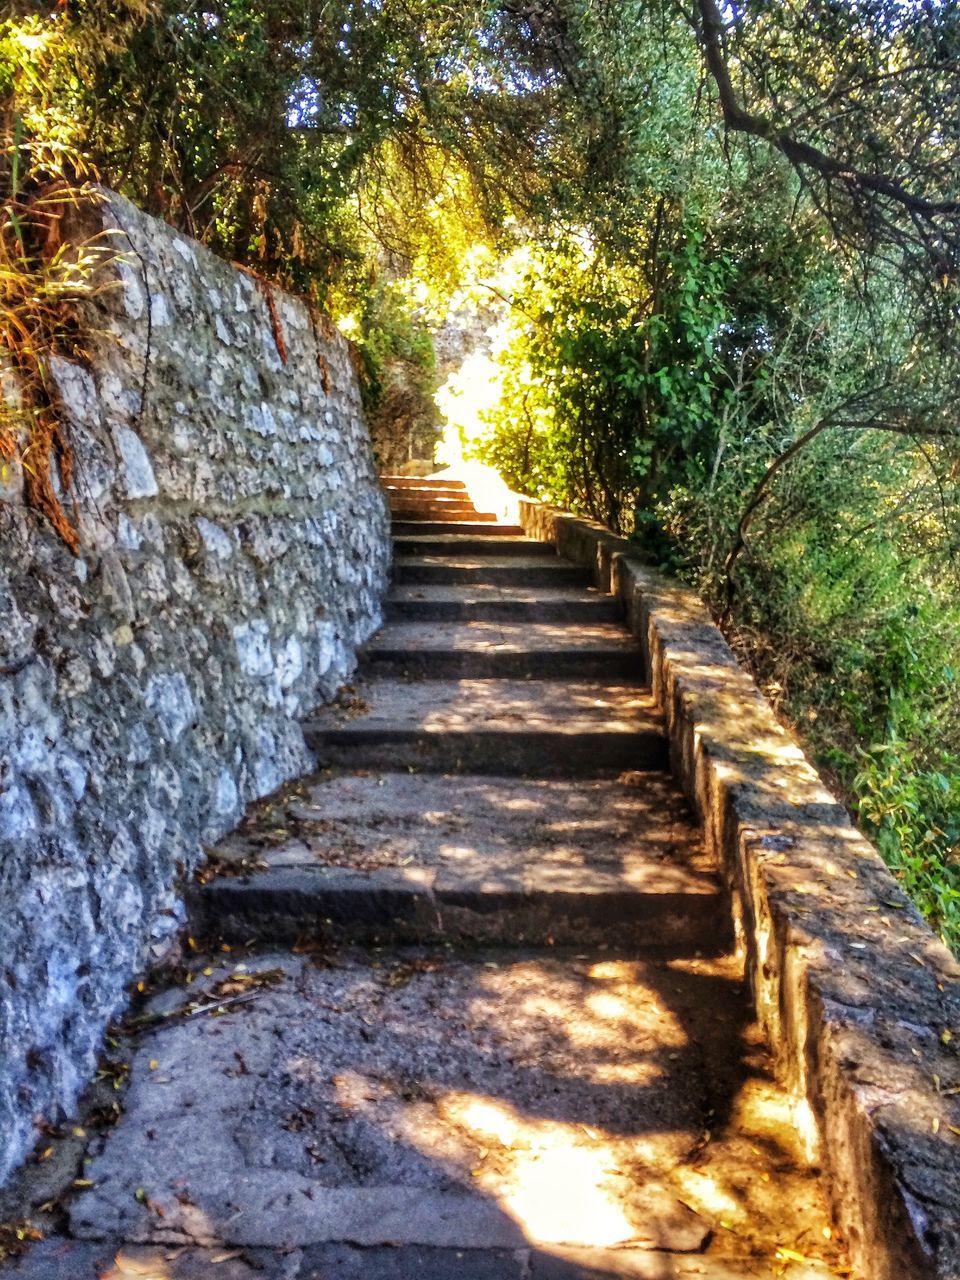 the way forward, steps, tree, diminishing perspective, steps and staircases, vanishing point, narrow, tranquility, staircase, nature, sunlight, forest, leading, footpath, walkway, pathway, rock - object, growth, plant, tranquil scene